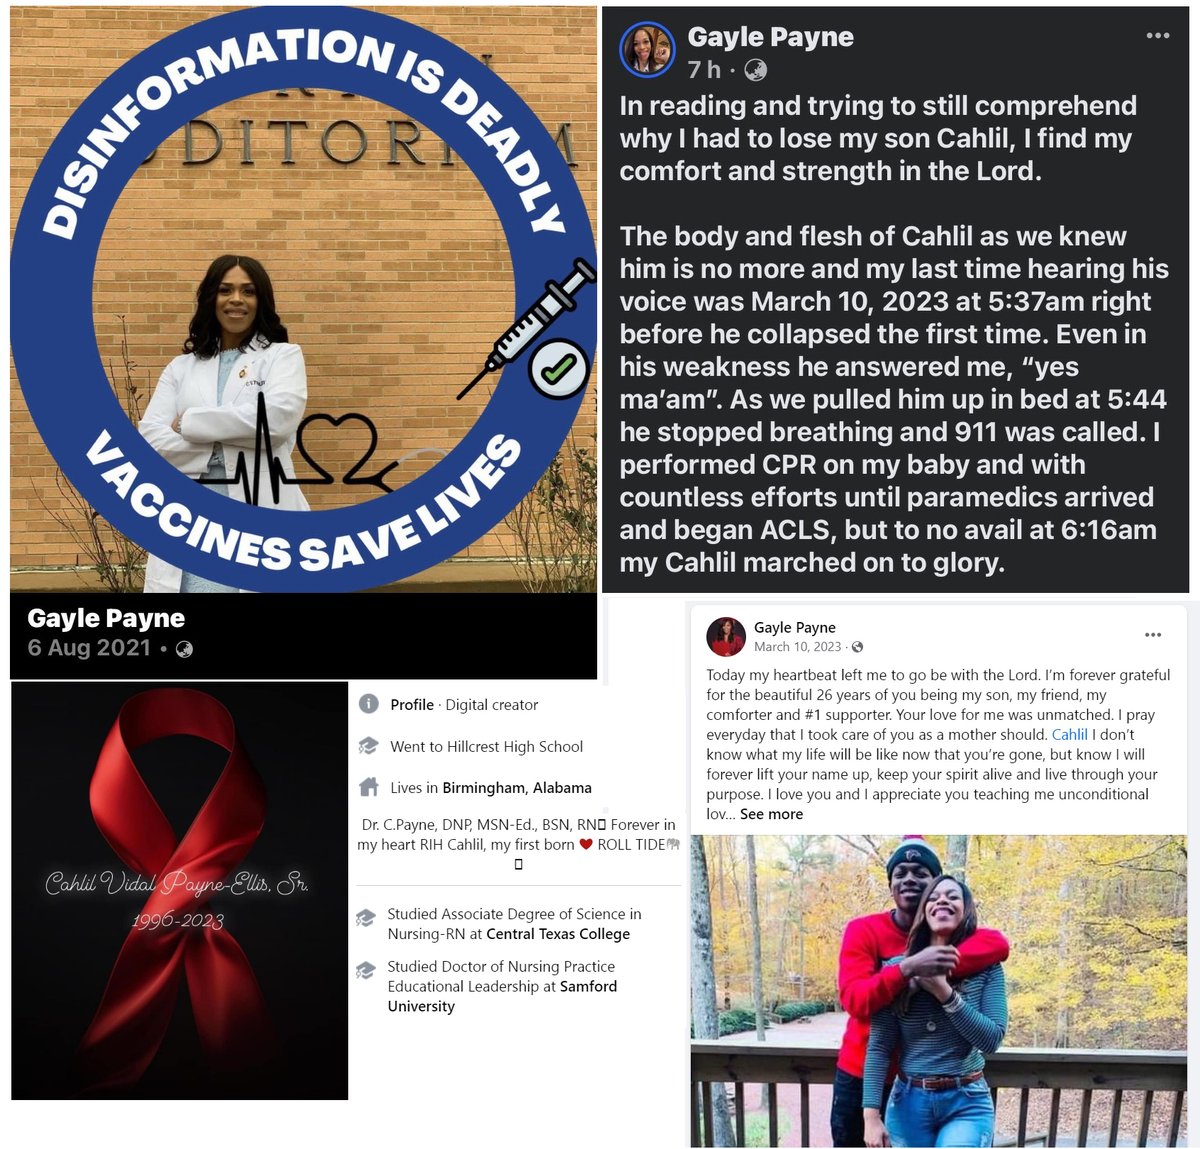 Birmingham, AL - 26 year old Cahlil Vidal Payne-Ellis collapsed at home at 5:40am & stopped breathing. 
He died from a cardiac arrest on Mar.10, 2023.

His mother, Doctor of Nursing Practice, was a victim of COVID-19 mRNA Vaccine Disinformation and Propaganda

#DiedSuddenly